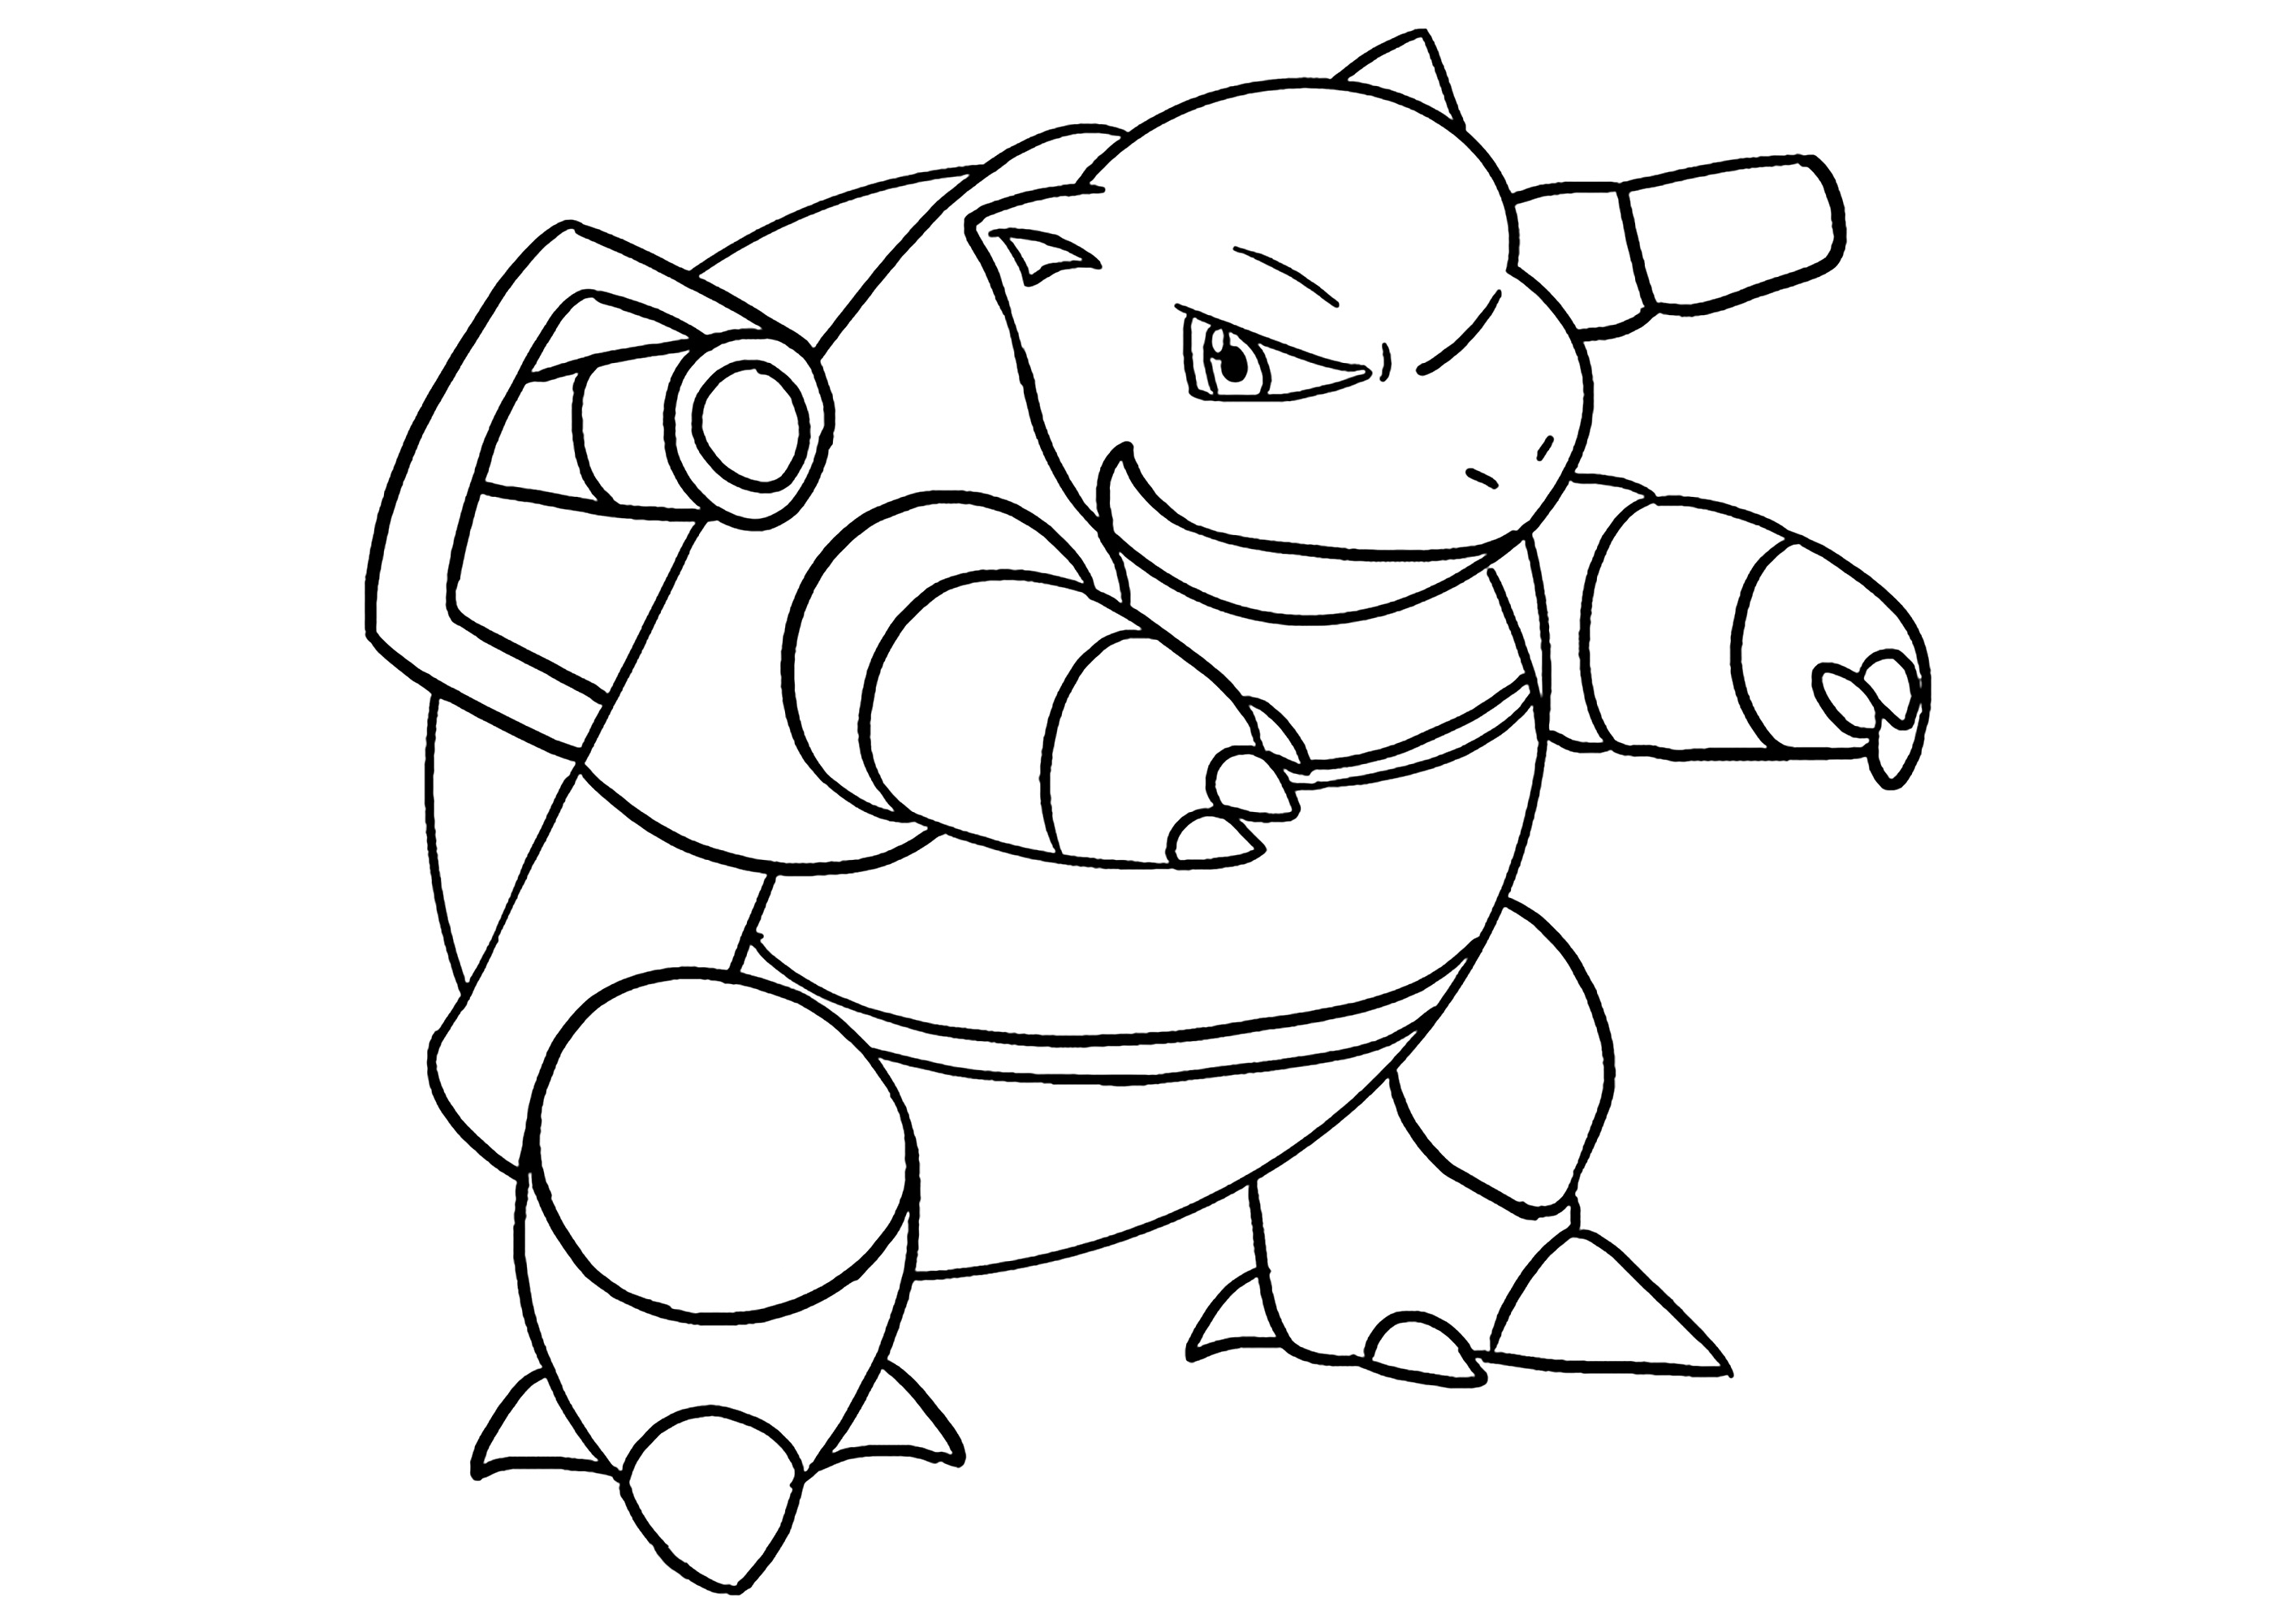 Blastoise : Coloring page for kids - All Pokemon coloring pages Kids ...